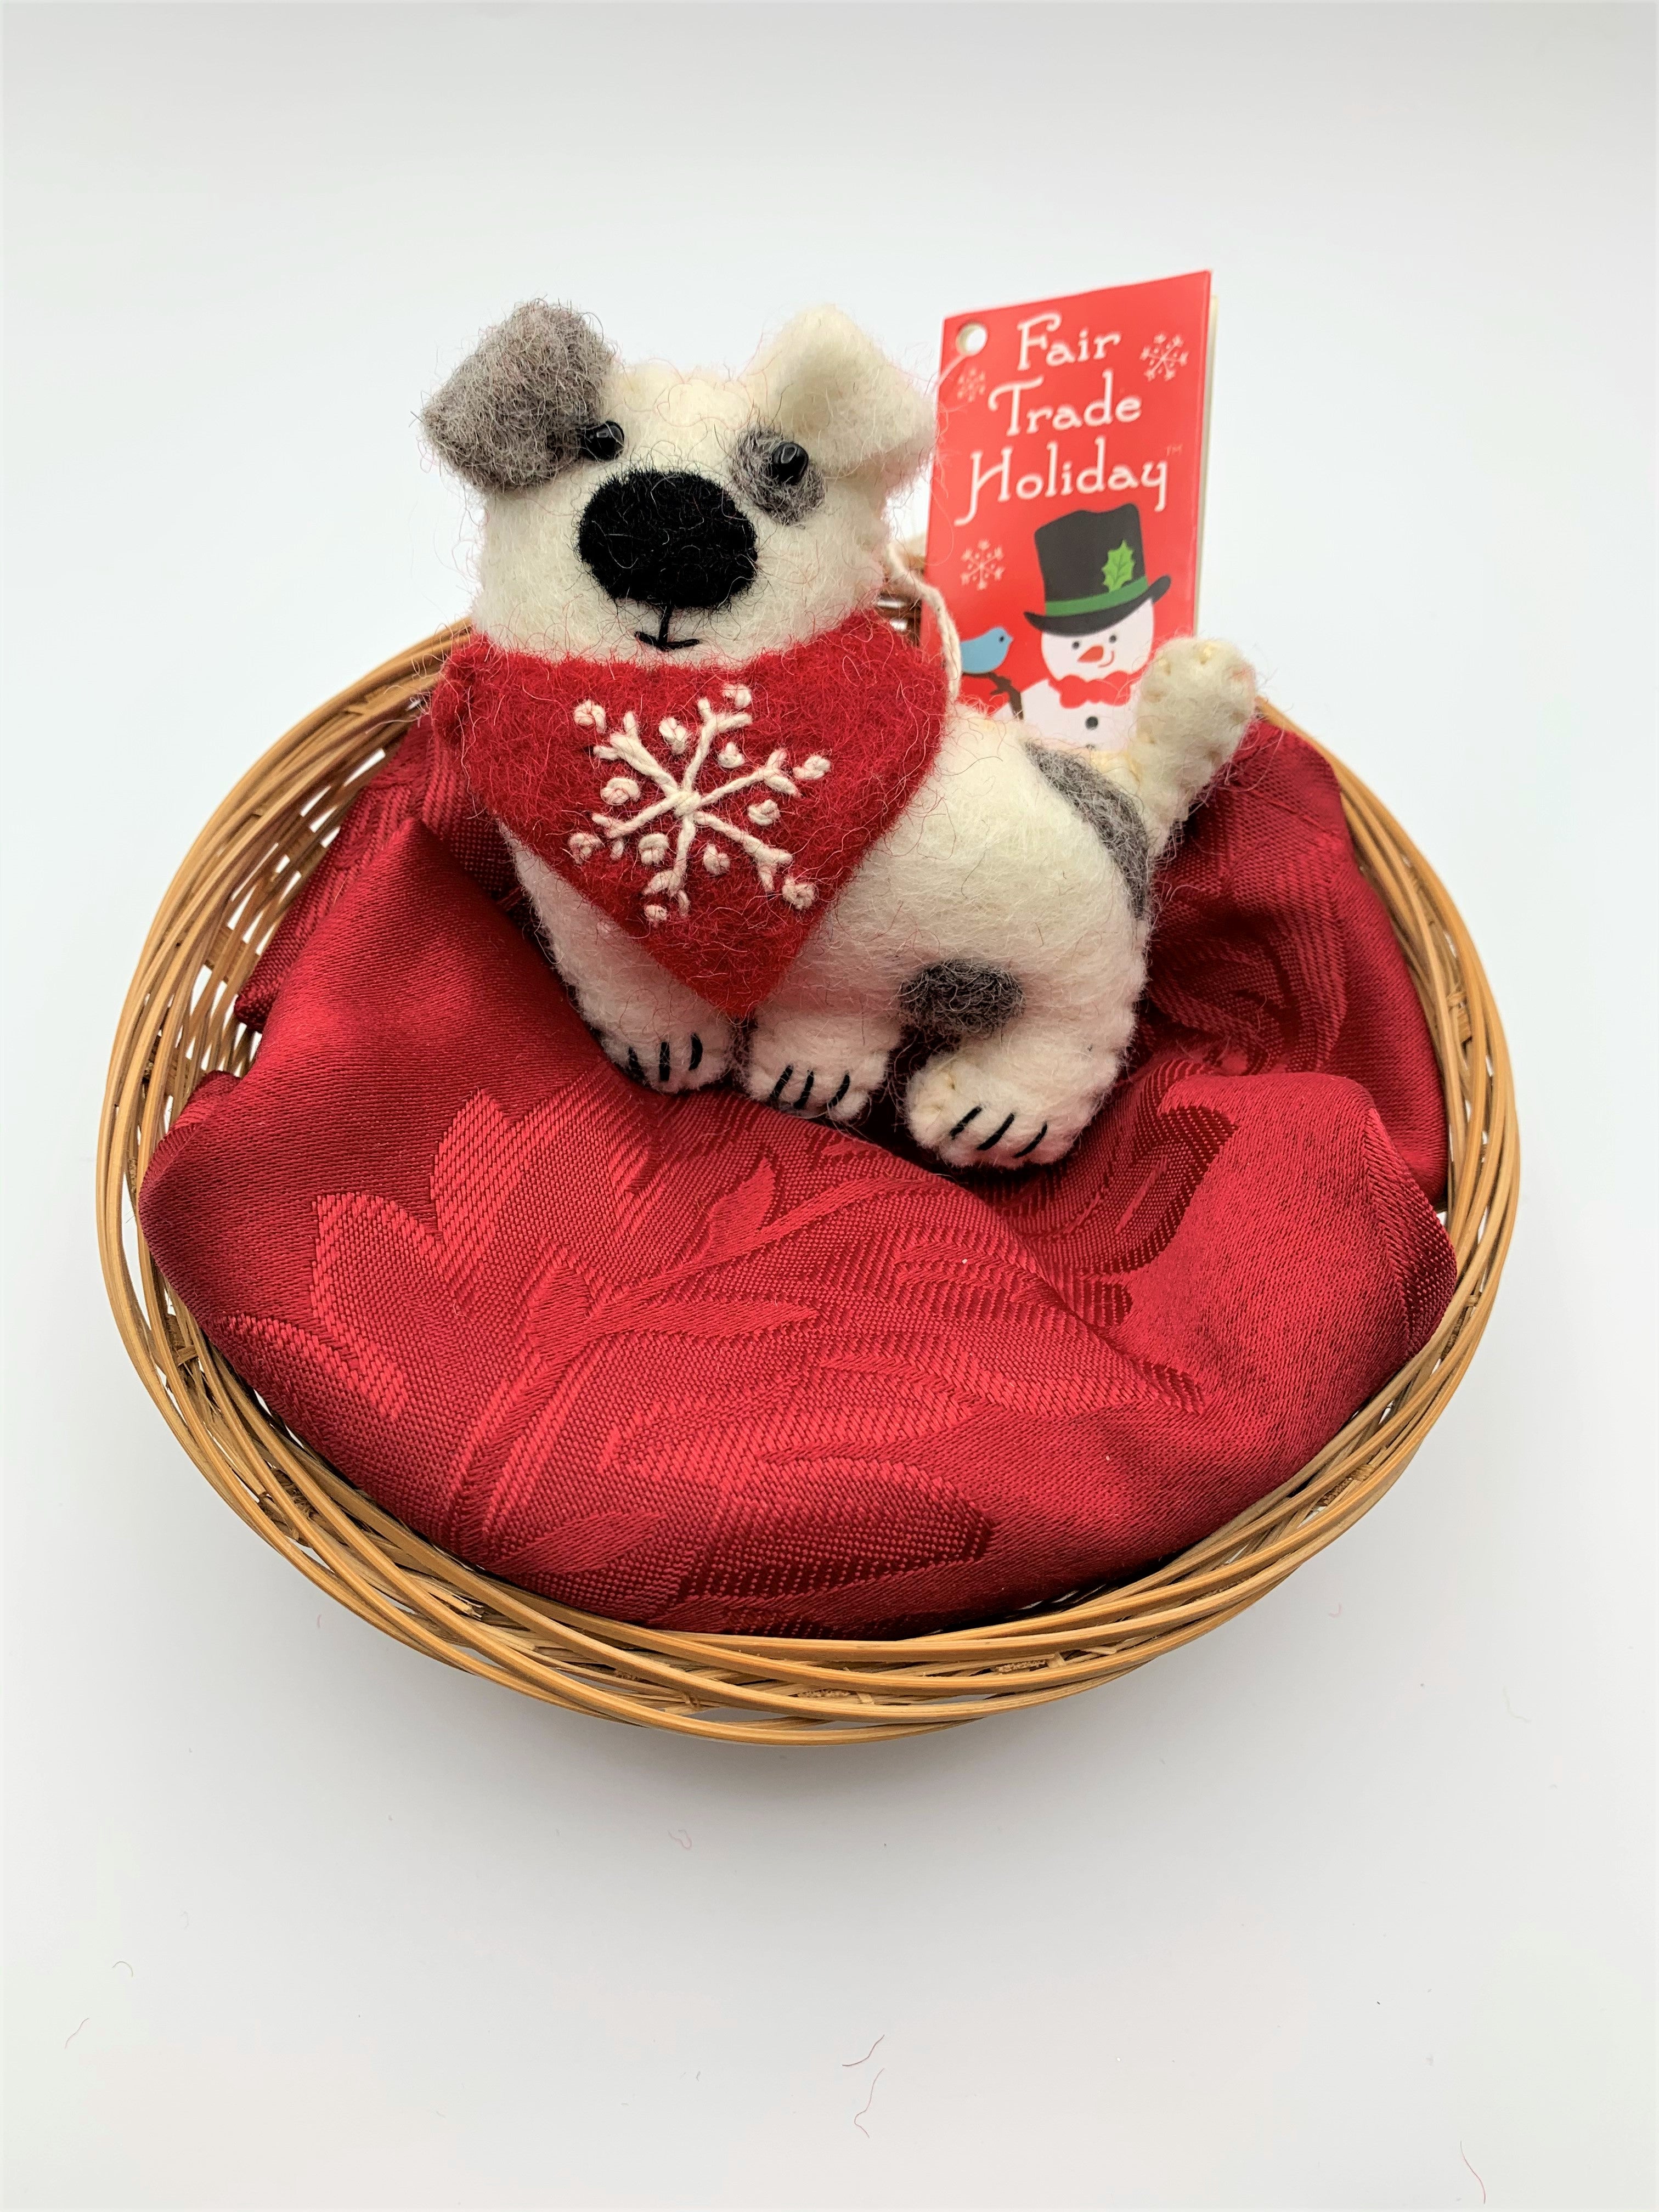 Patches the dog is a hand-crafted (fair trade) Christmas ornament made of 100% natural wool. He is white with brown patches and a red bandana with a 'signature' (white) snowflake on it. Approximately 3.75"x3.75".  He comes with a detachable fair trade holiday tag to use if you are giving as a gift.